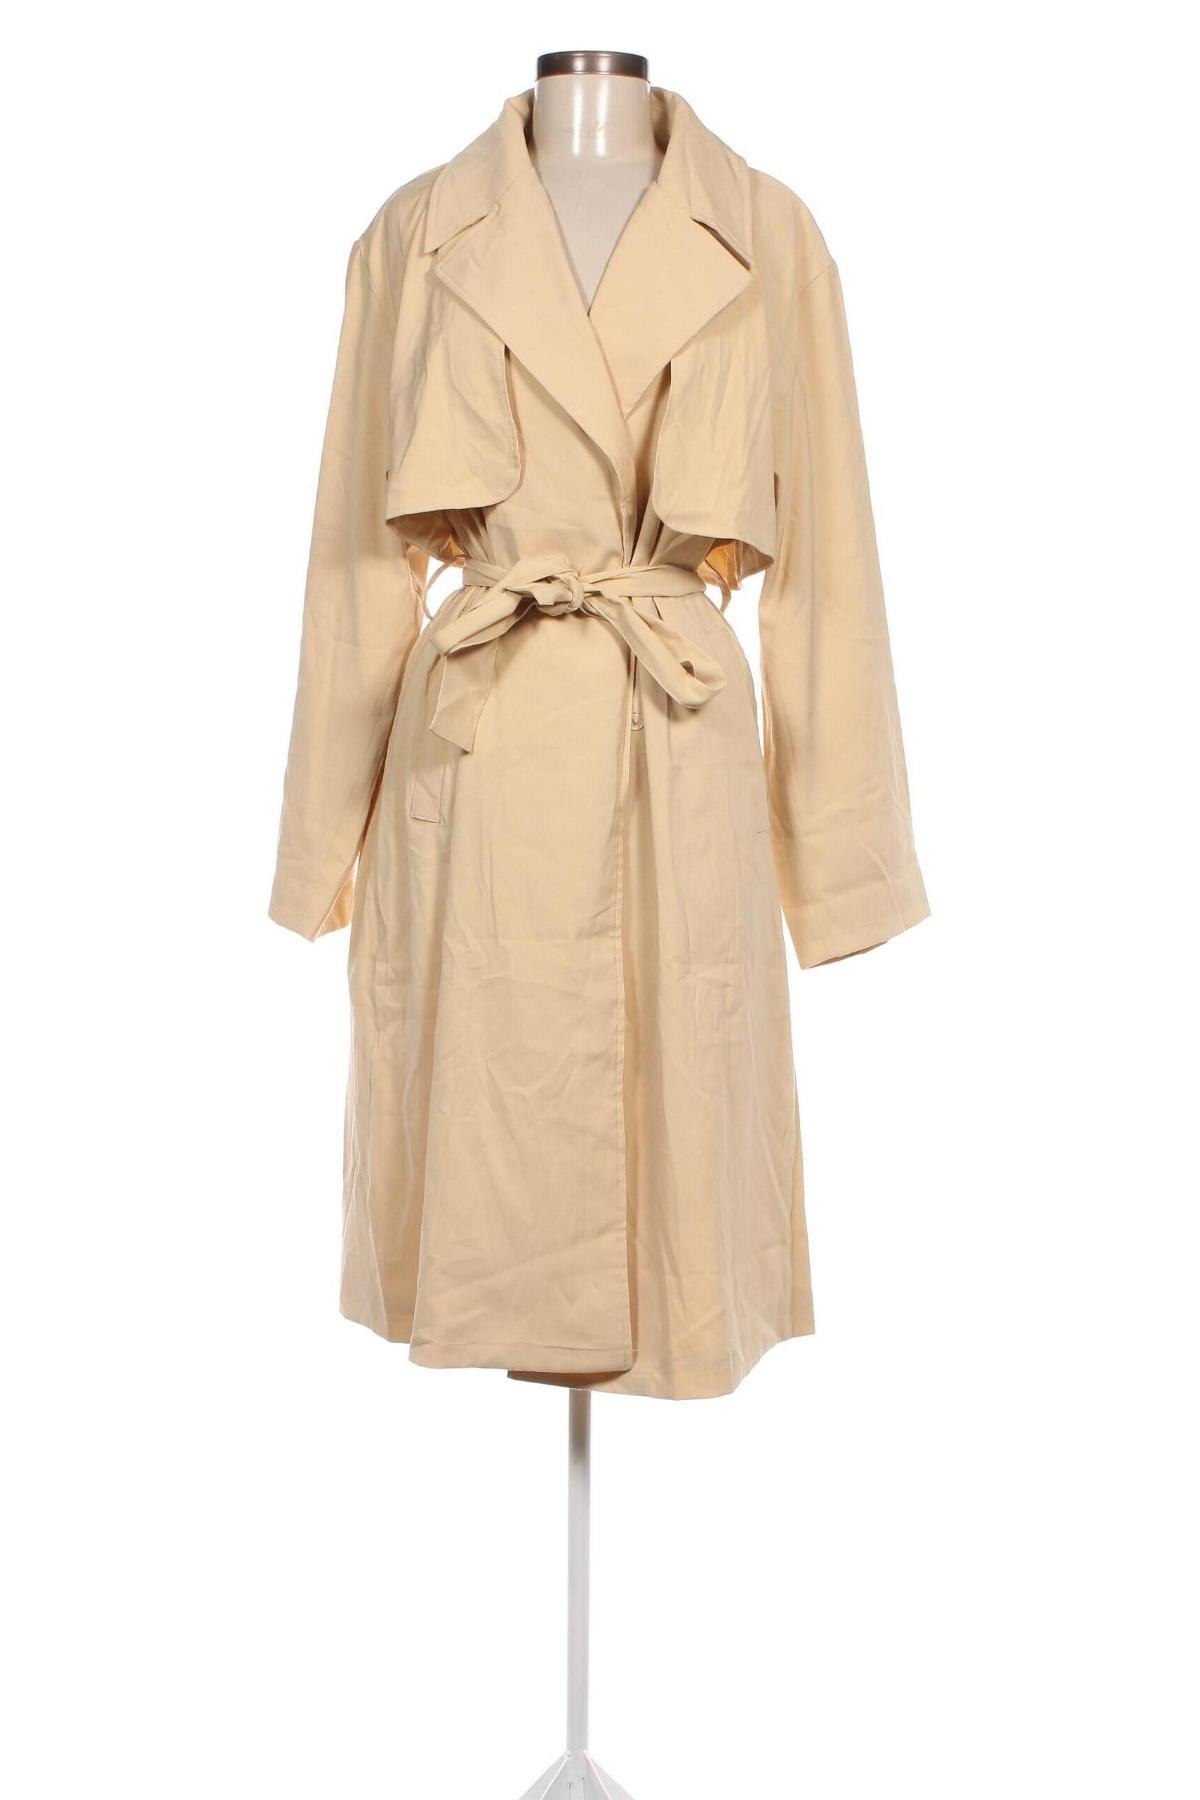 Damen Trenchcoat Katy Perry exclusive for ABOUT YOU, Größe S, Farbe Beige, Preis 69,59 €